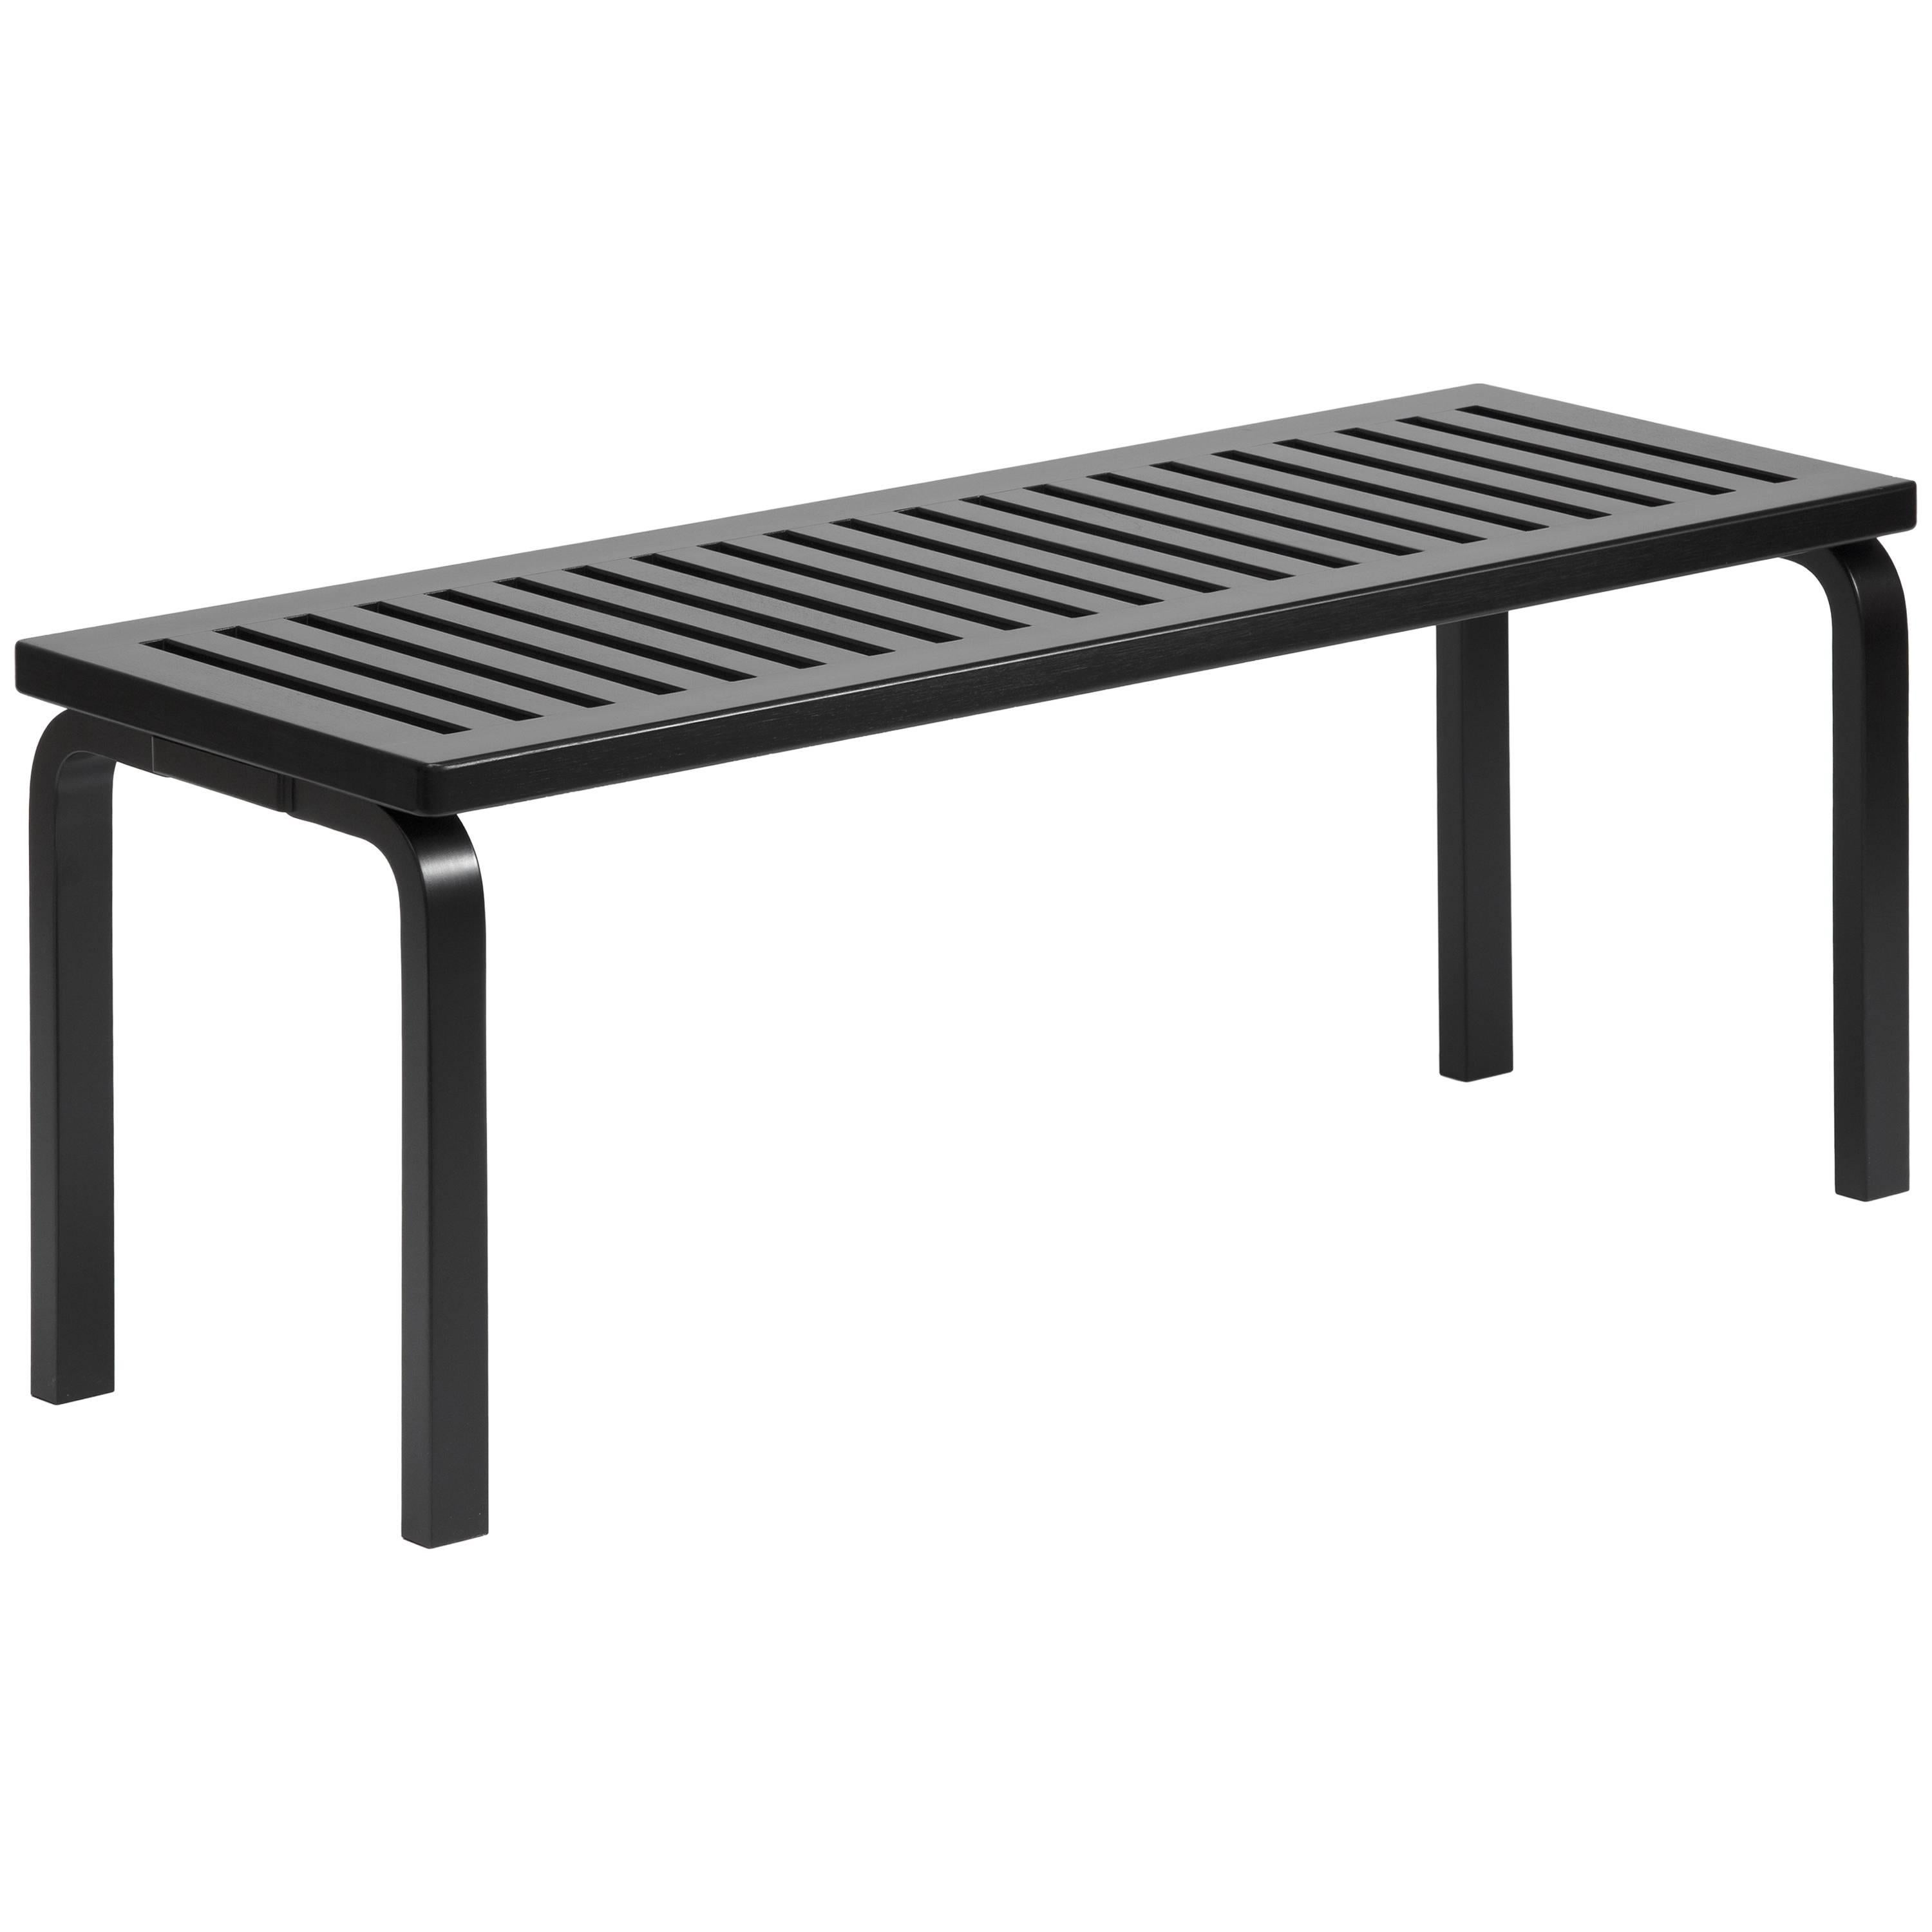 Authentic Bench 153A in Birch with Black Lacquer by Alvar Aalto & Artek For Sale